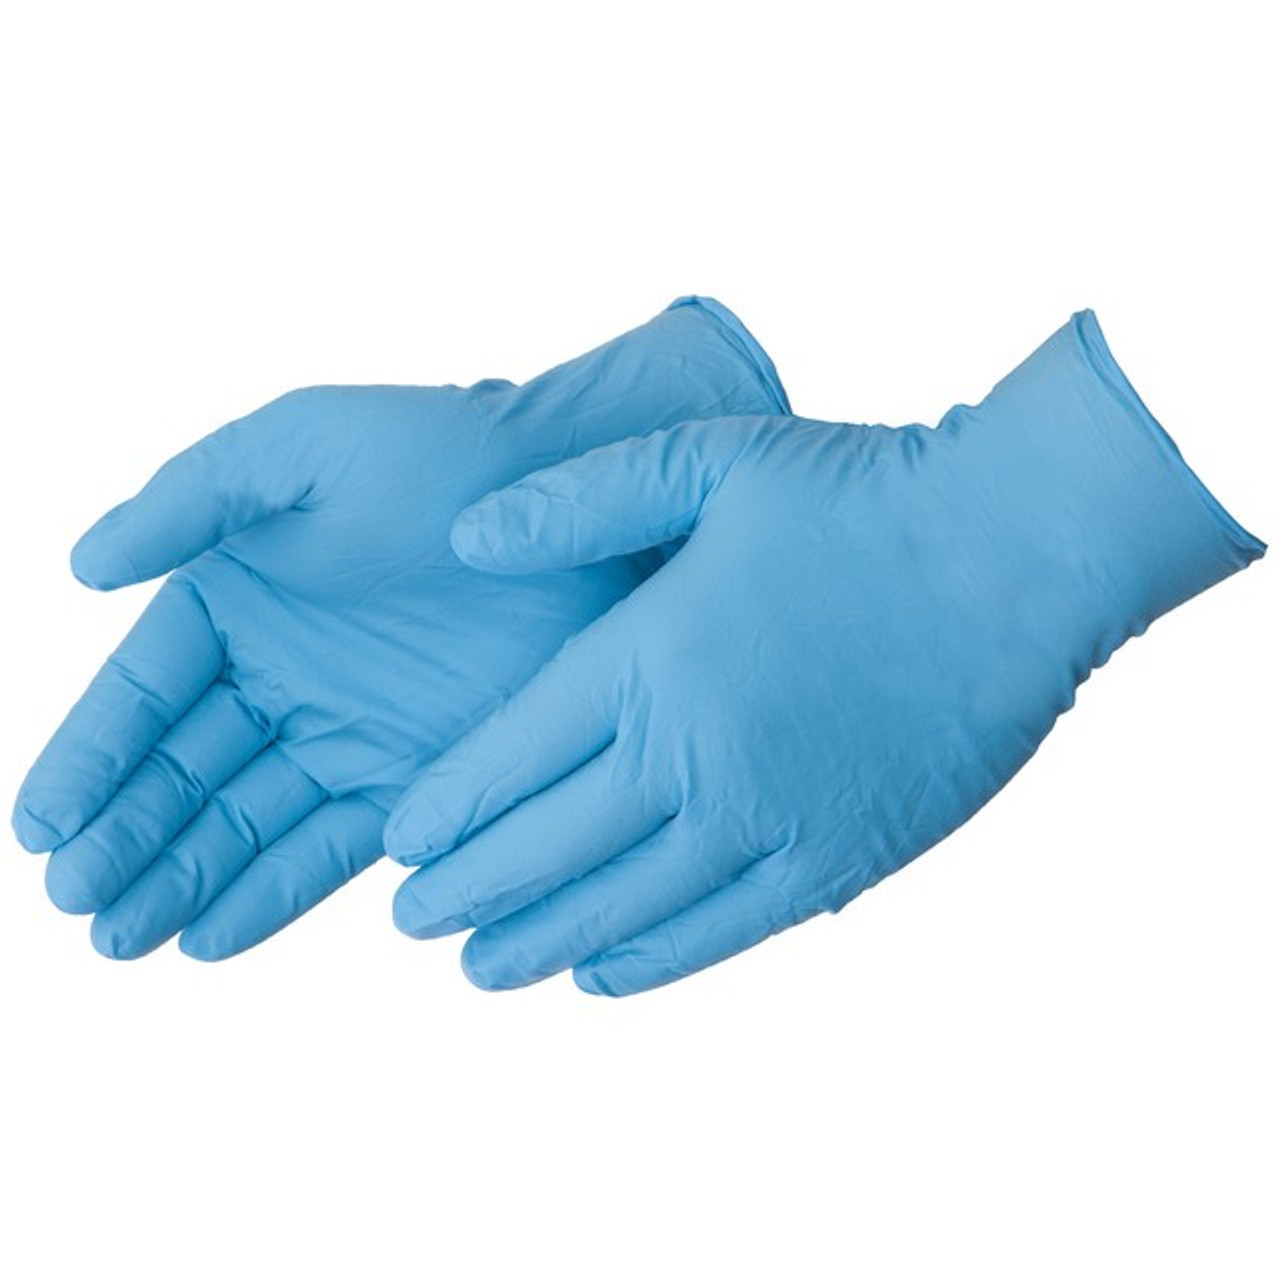 Powder Free 11 Length Disposable Case of 500 Extra Large 8 mils Thick Global Glove 805PF Nitrile Glove with Rolled Cuff 